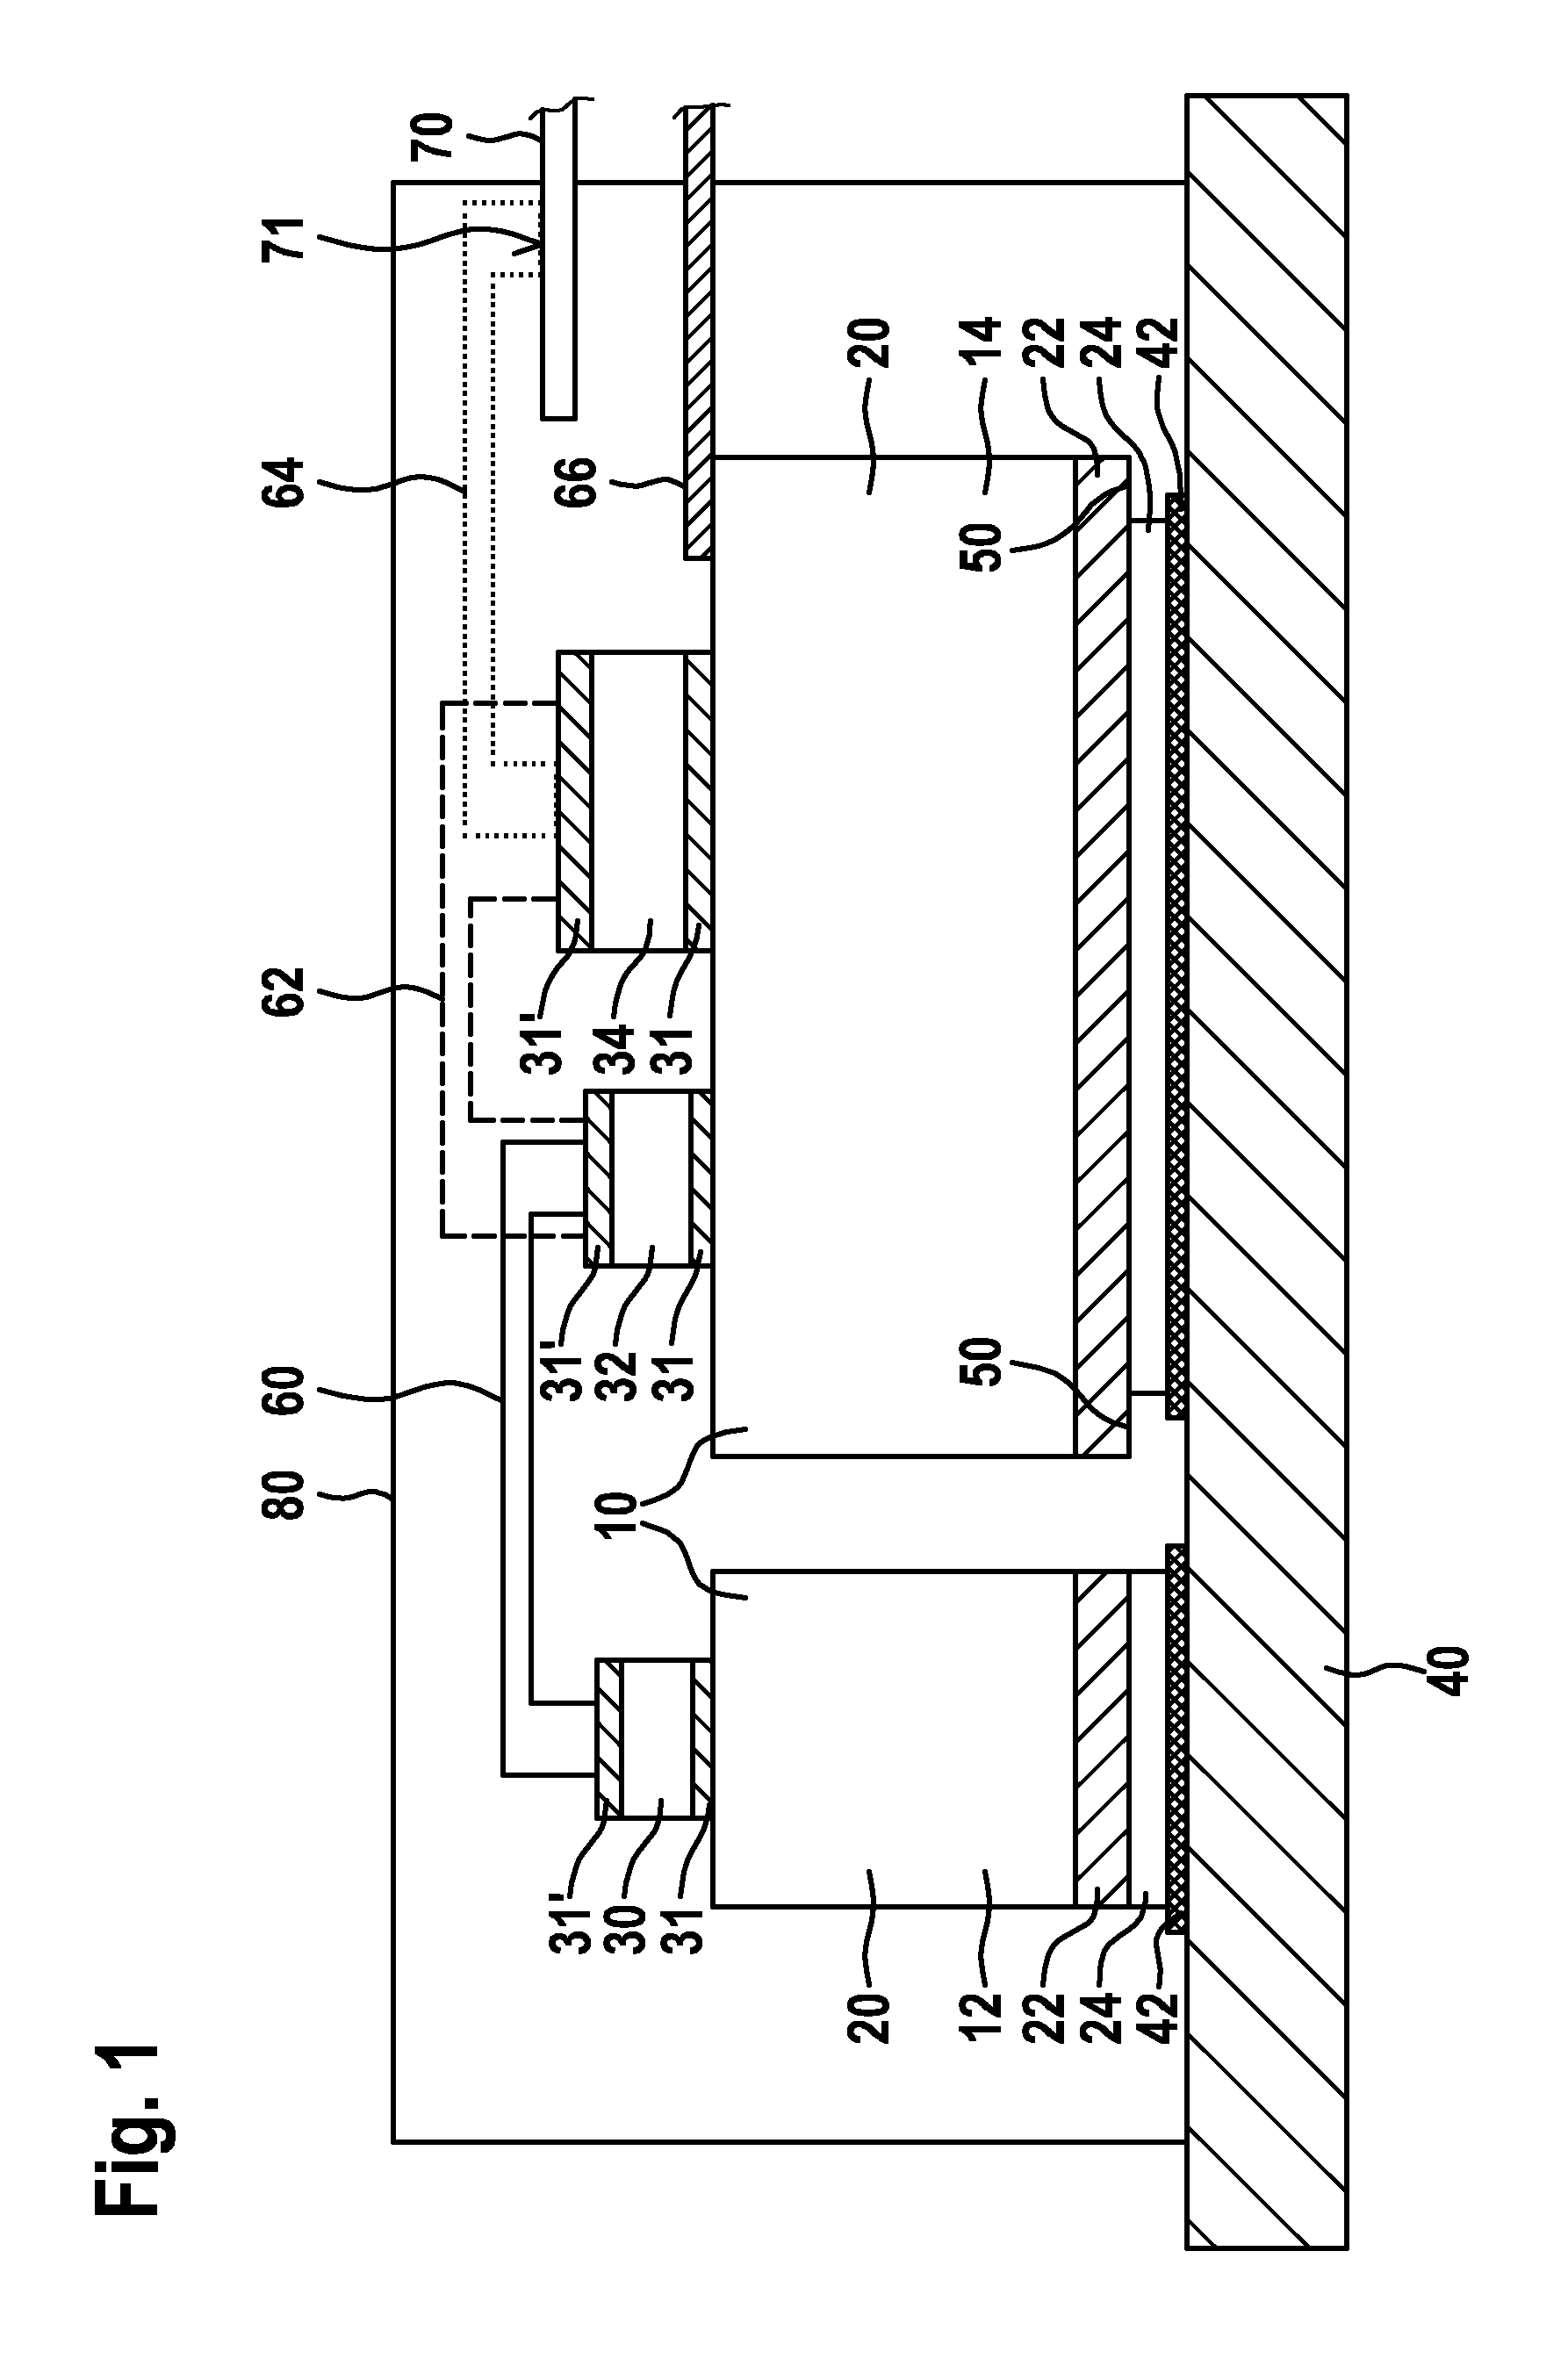 Method for producing and electrical circuit and electrical circuit